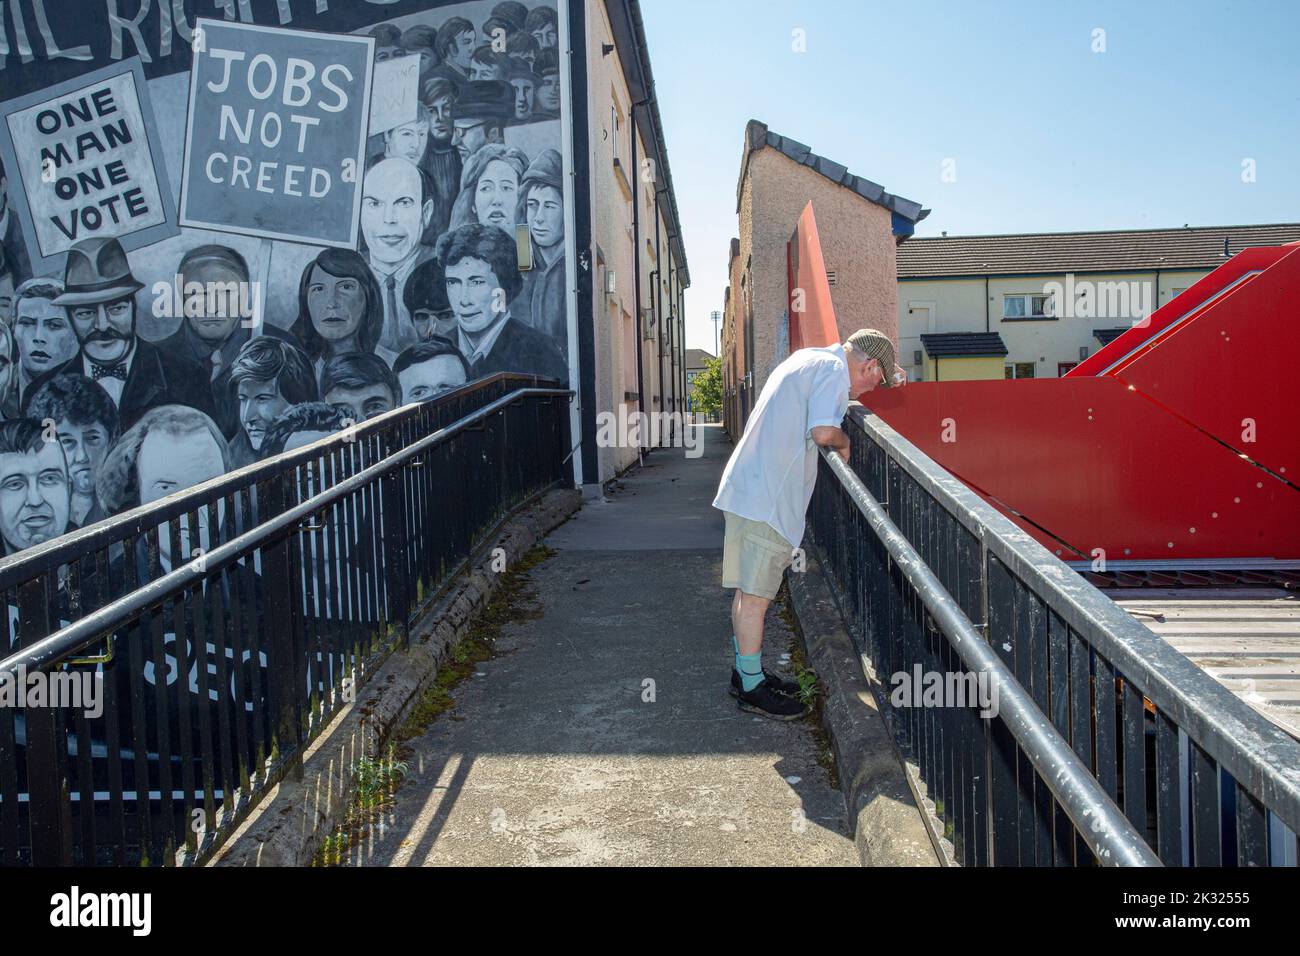 A mural in Derry depicting events during the Troubles in Northern Ireland Stock Photo